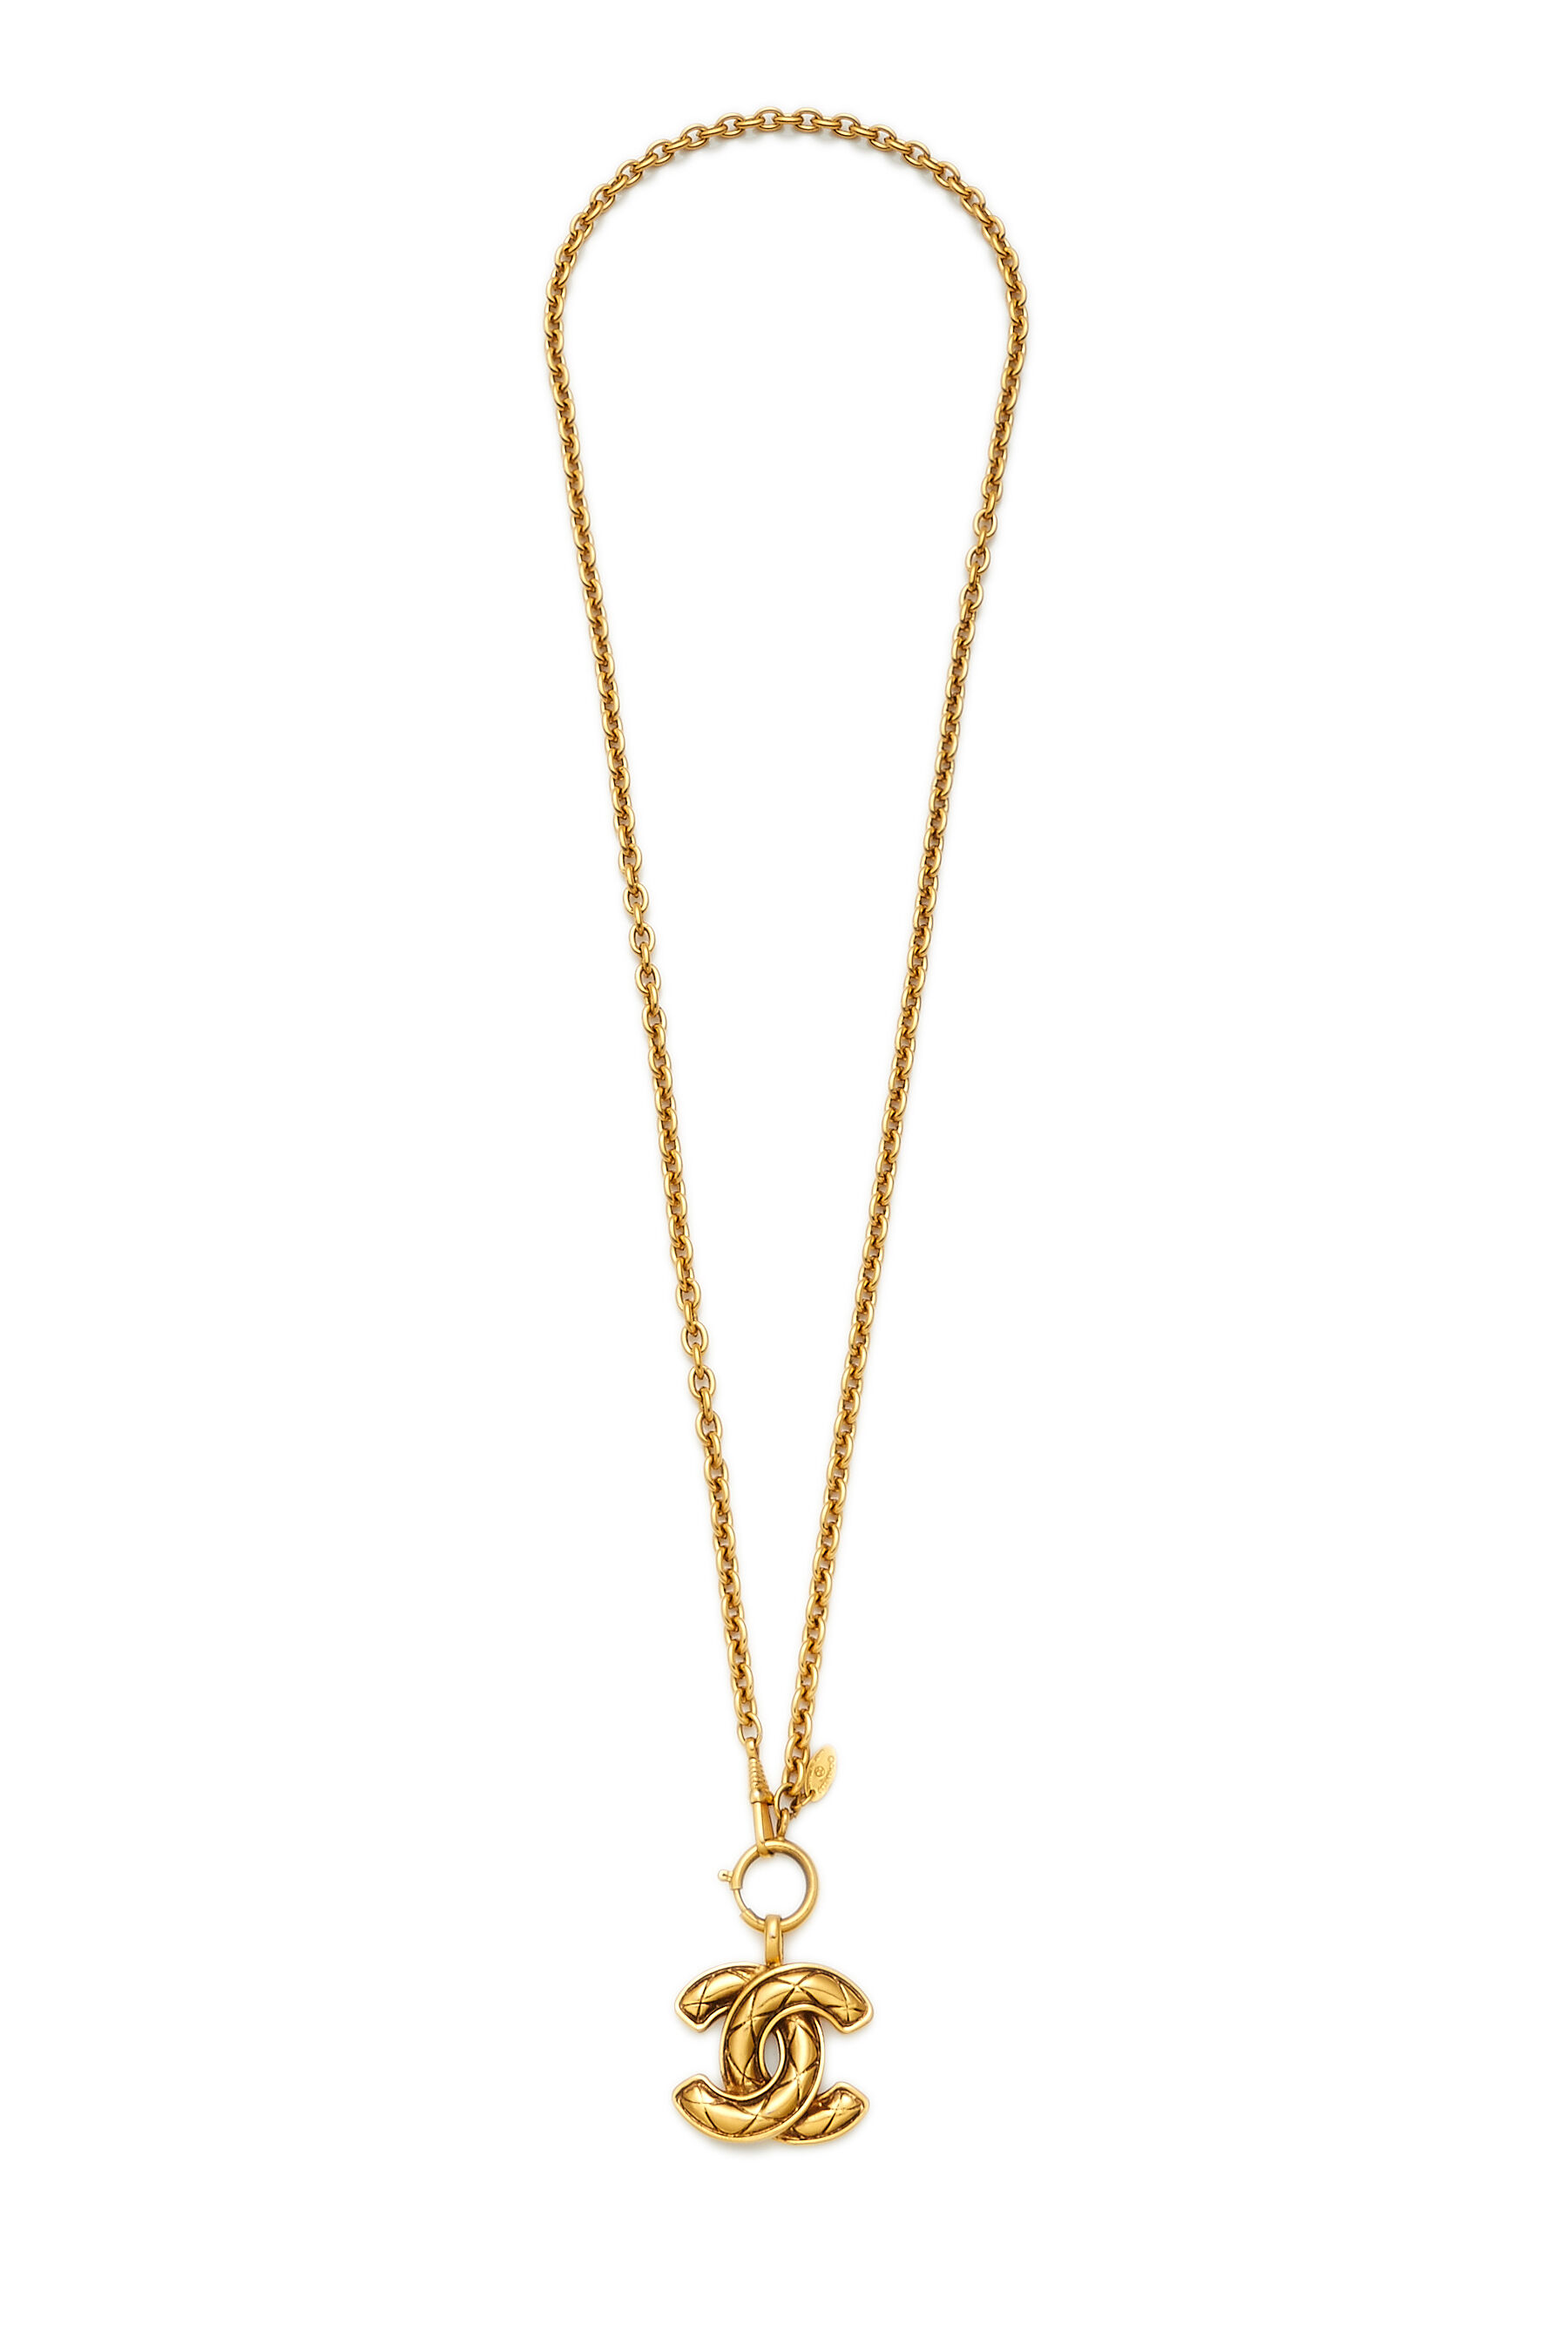 Chanel - Gold Quilted 'CC' Necklace Medium